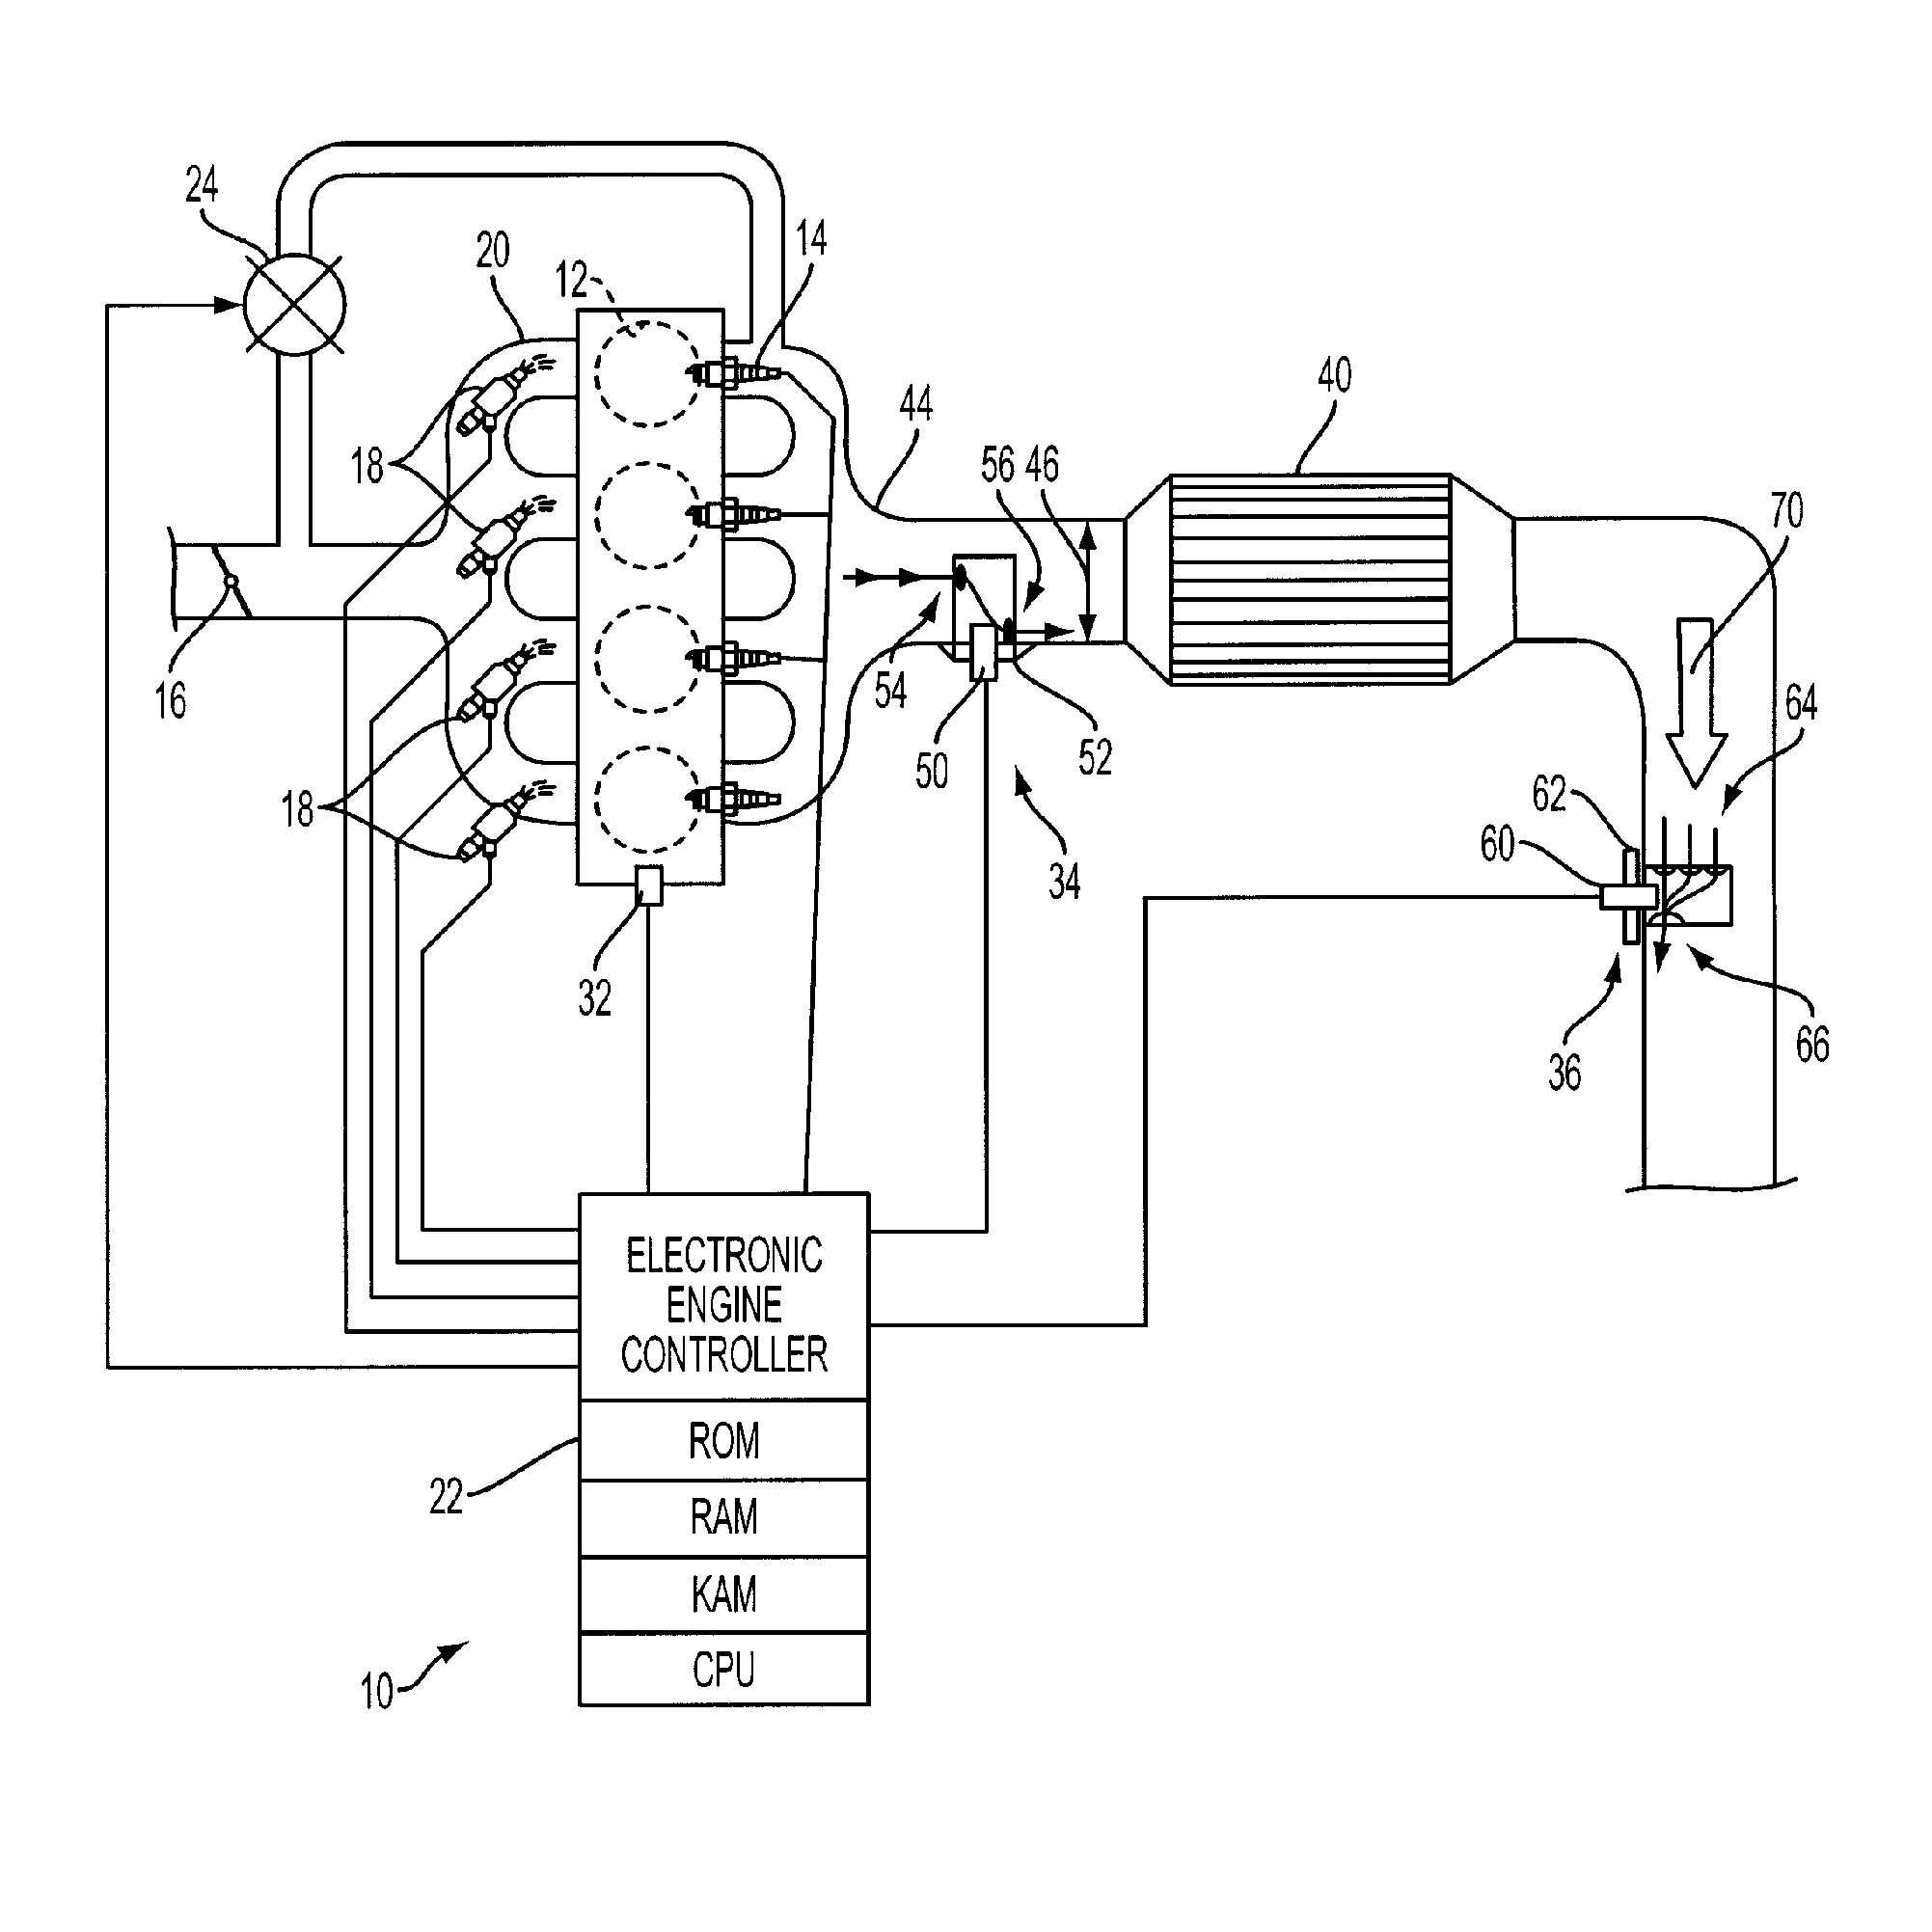 System and method for improving performance of a fluid sensor for an internal combustion engine